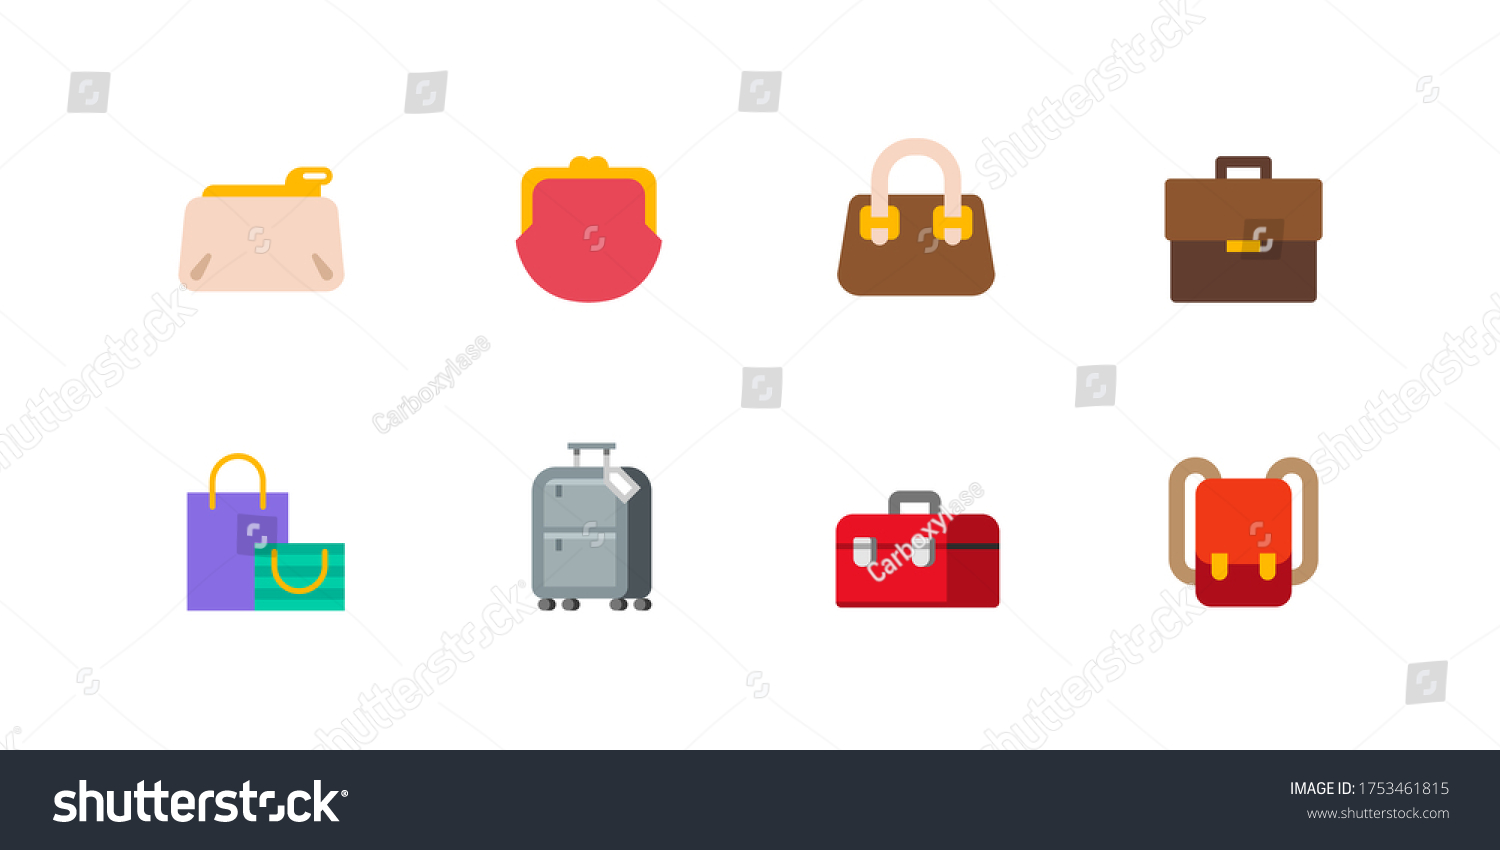 SVG of Women's fashion bags set. Isolated bags, backpack, travel luggage, suitcase, shopping bag vector icons collection svg